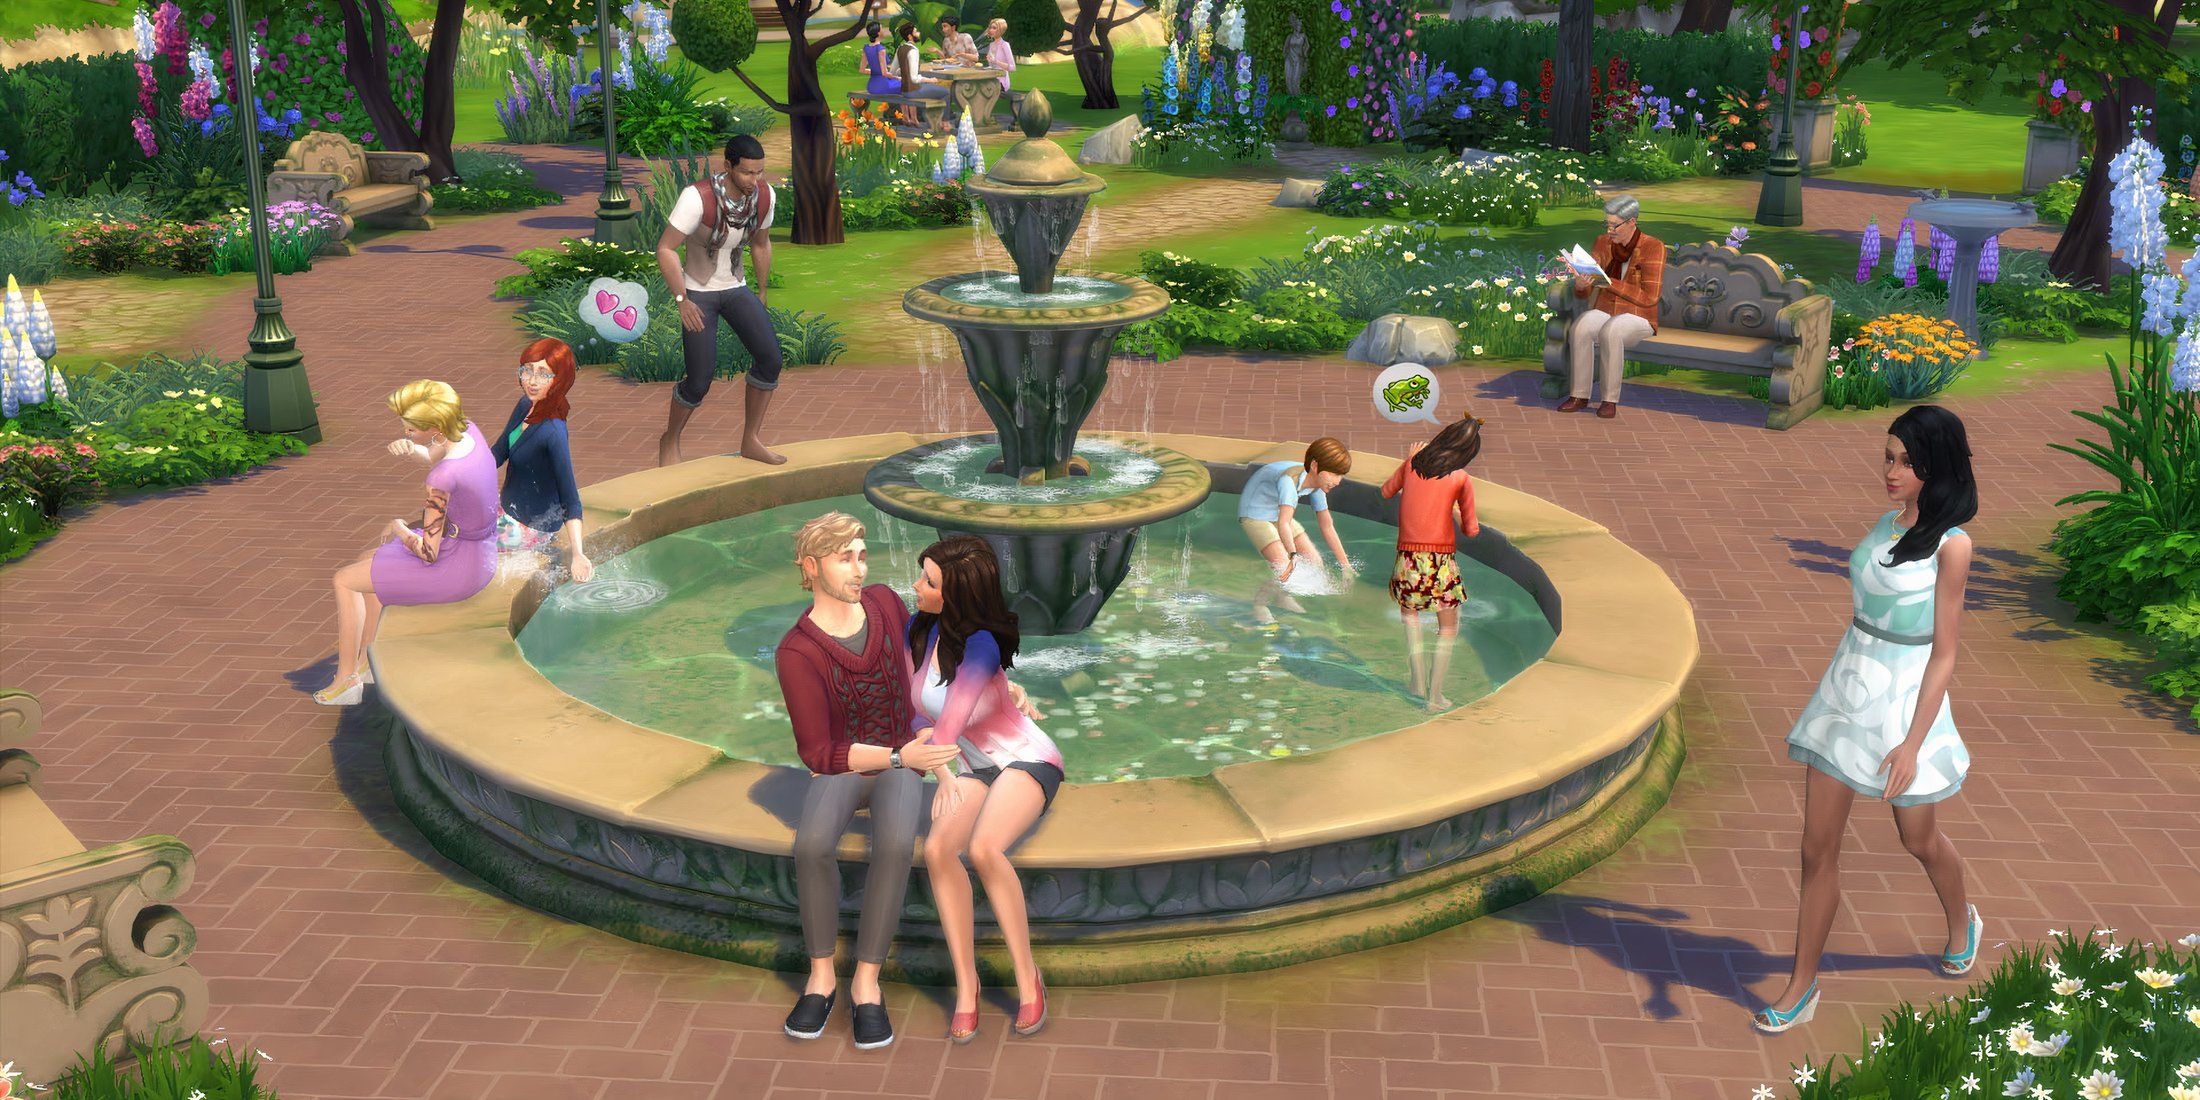 Sims 4 characters on dates around a fountain